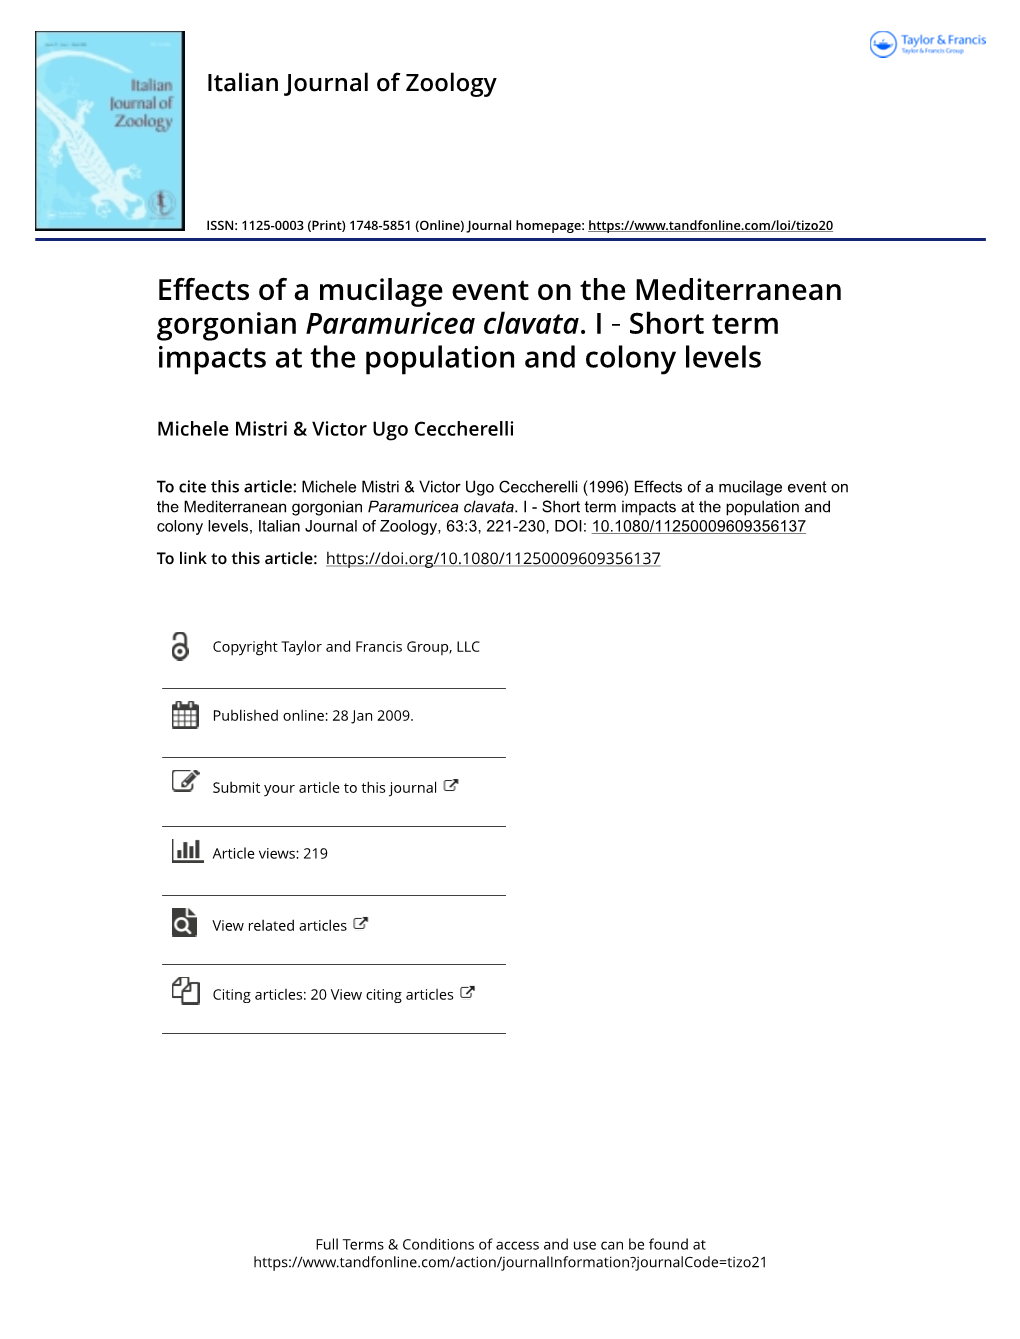 Effects of a Mucilage Event on the Mediterranean Gorgonian Paramuricea Clavata